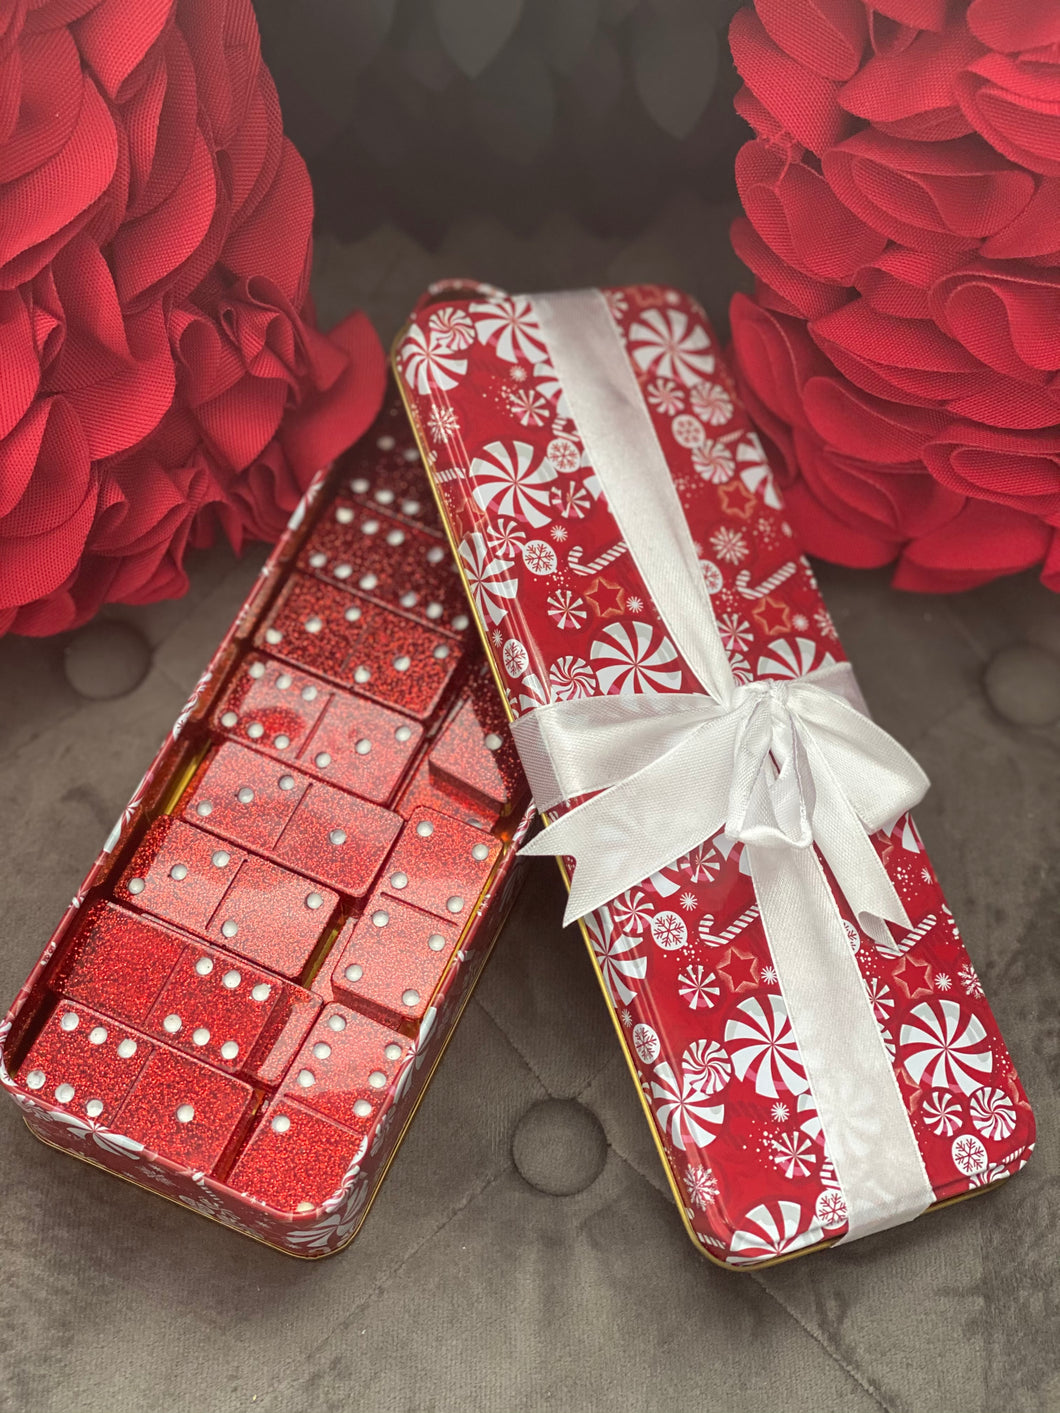 “Candy cane” domino set